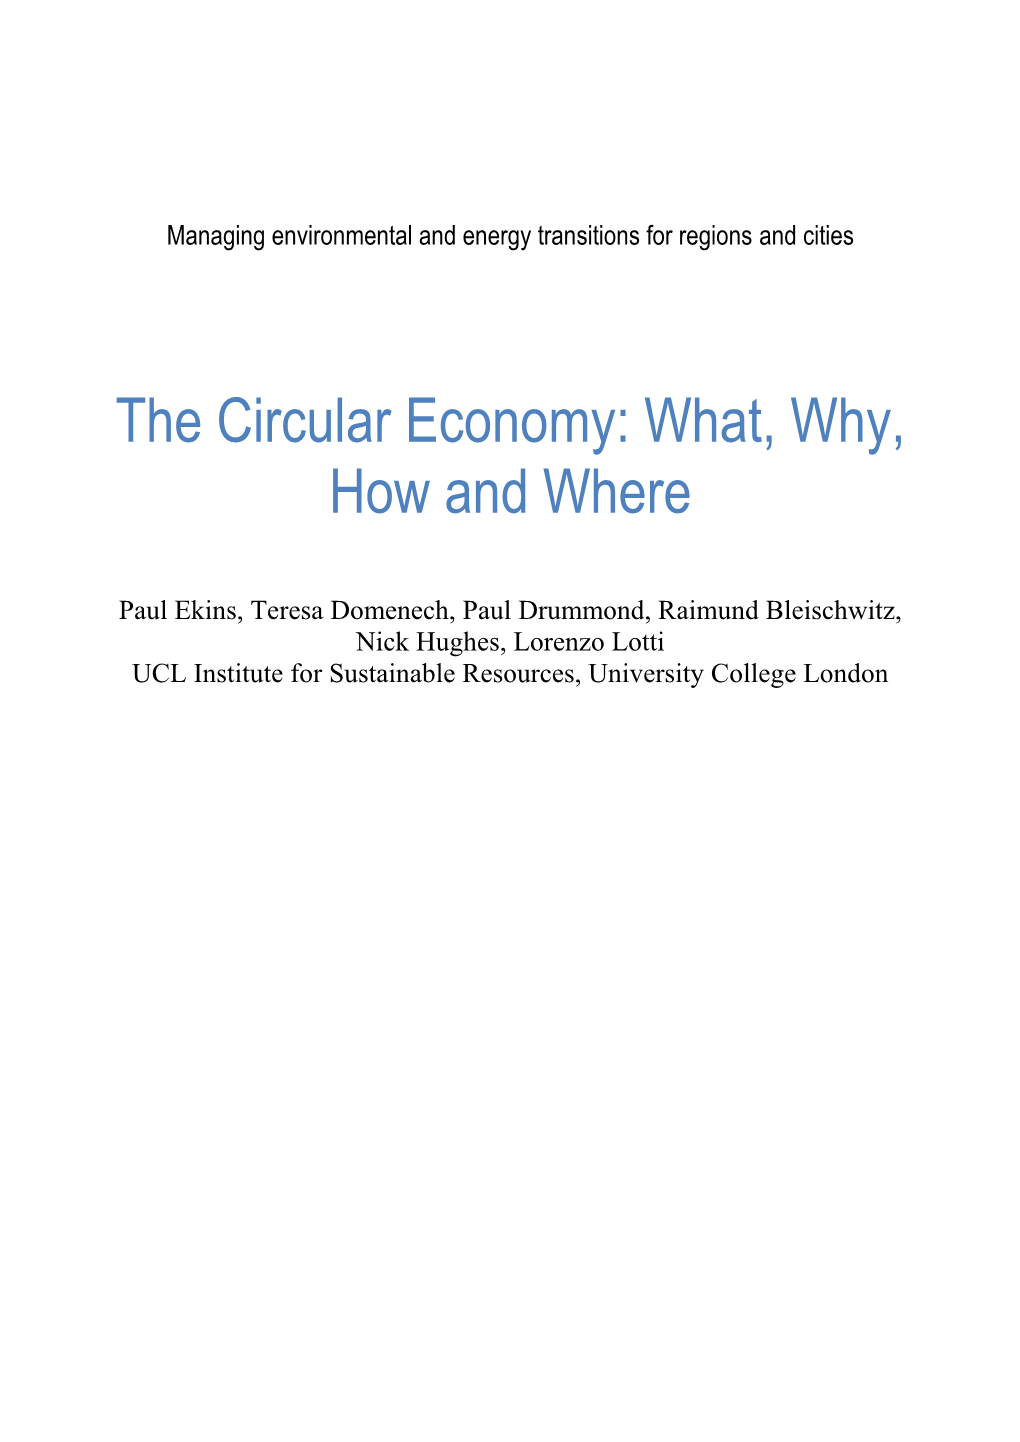 The Circular Economy: What, Why, How and Where